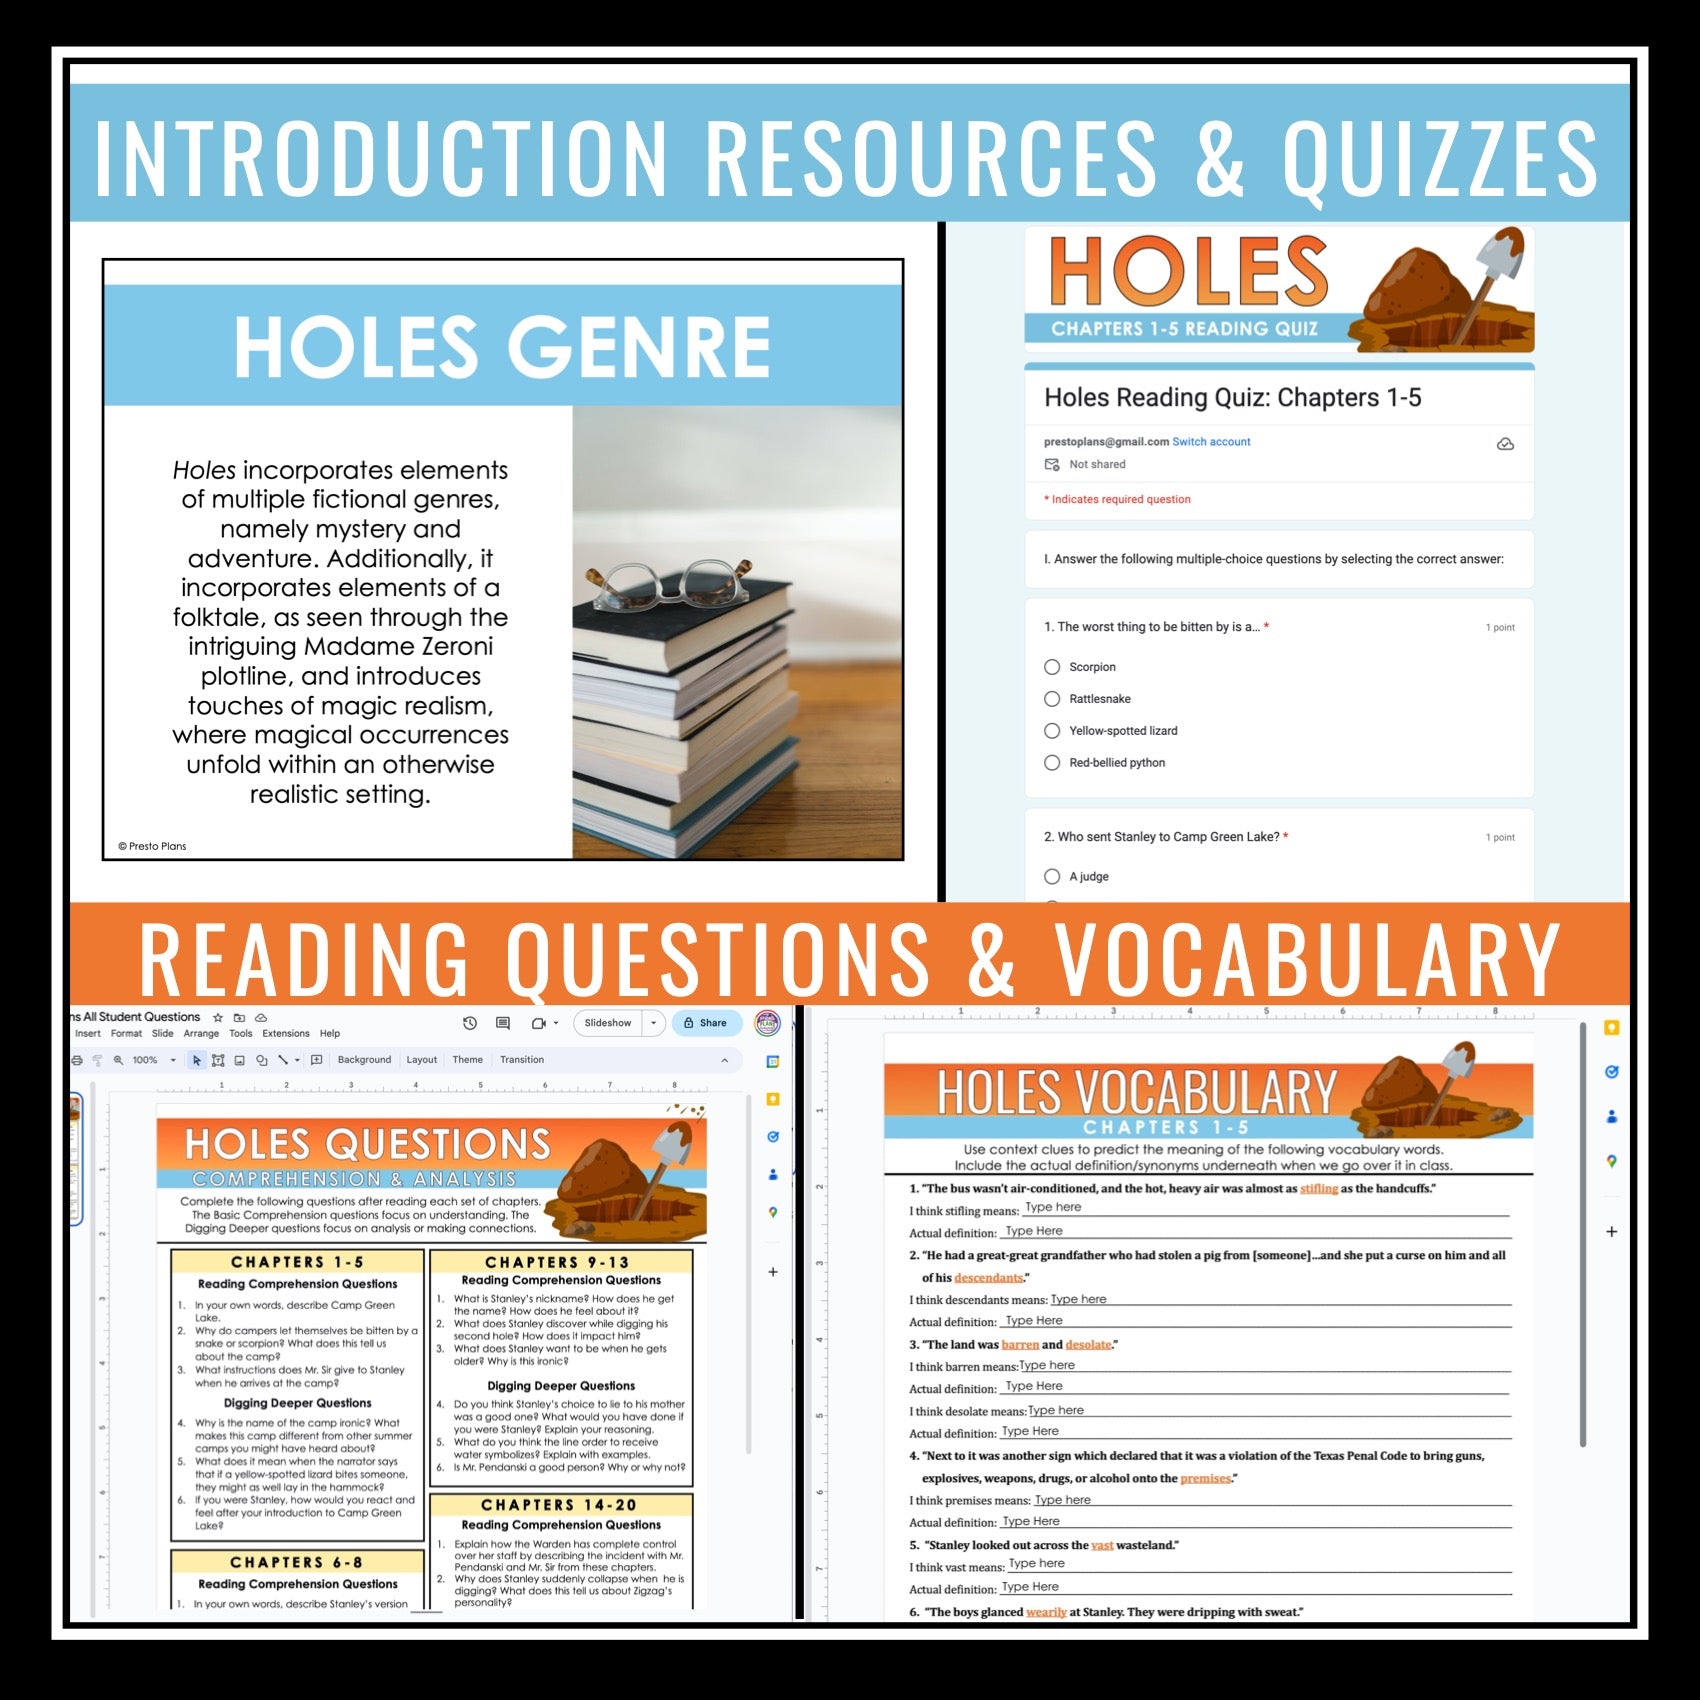 Holes by Louis Sachar One Page Book Project